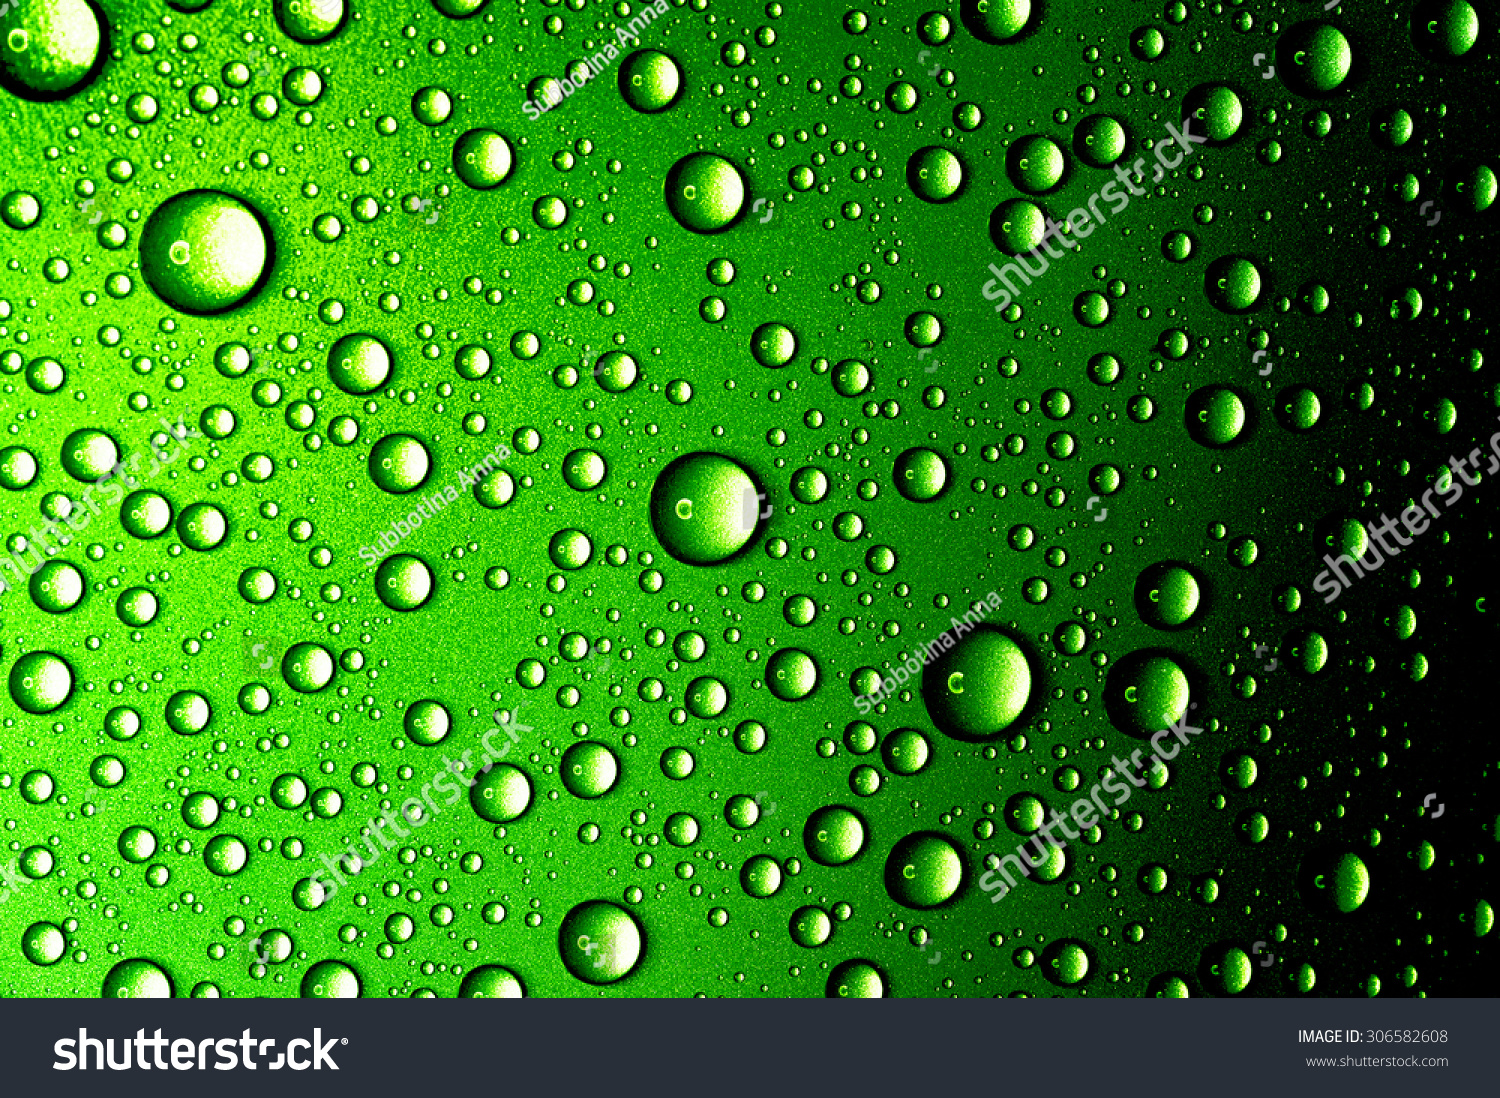 Water Drops Close Up. Abstract Green Background Of Waterdrops, Droplets ...